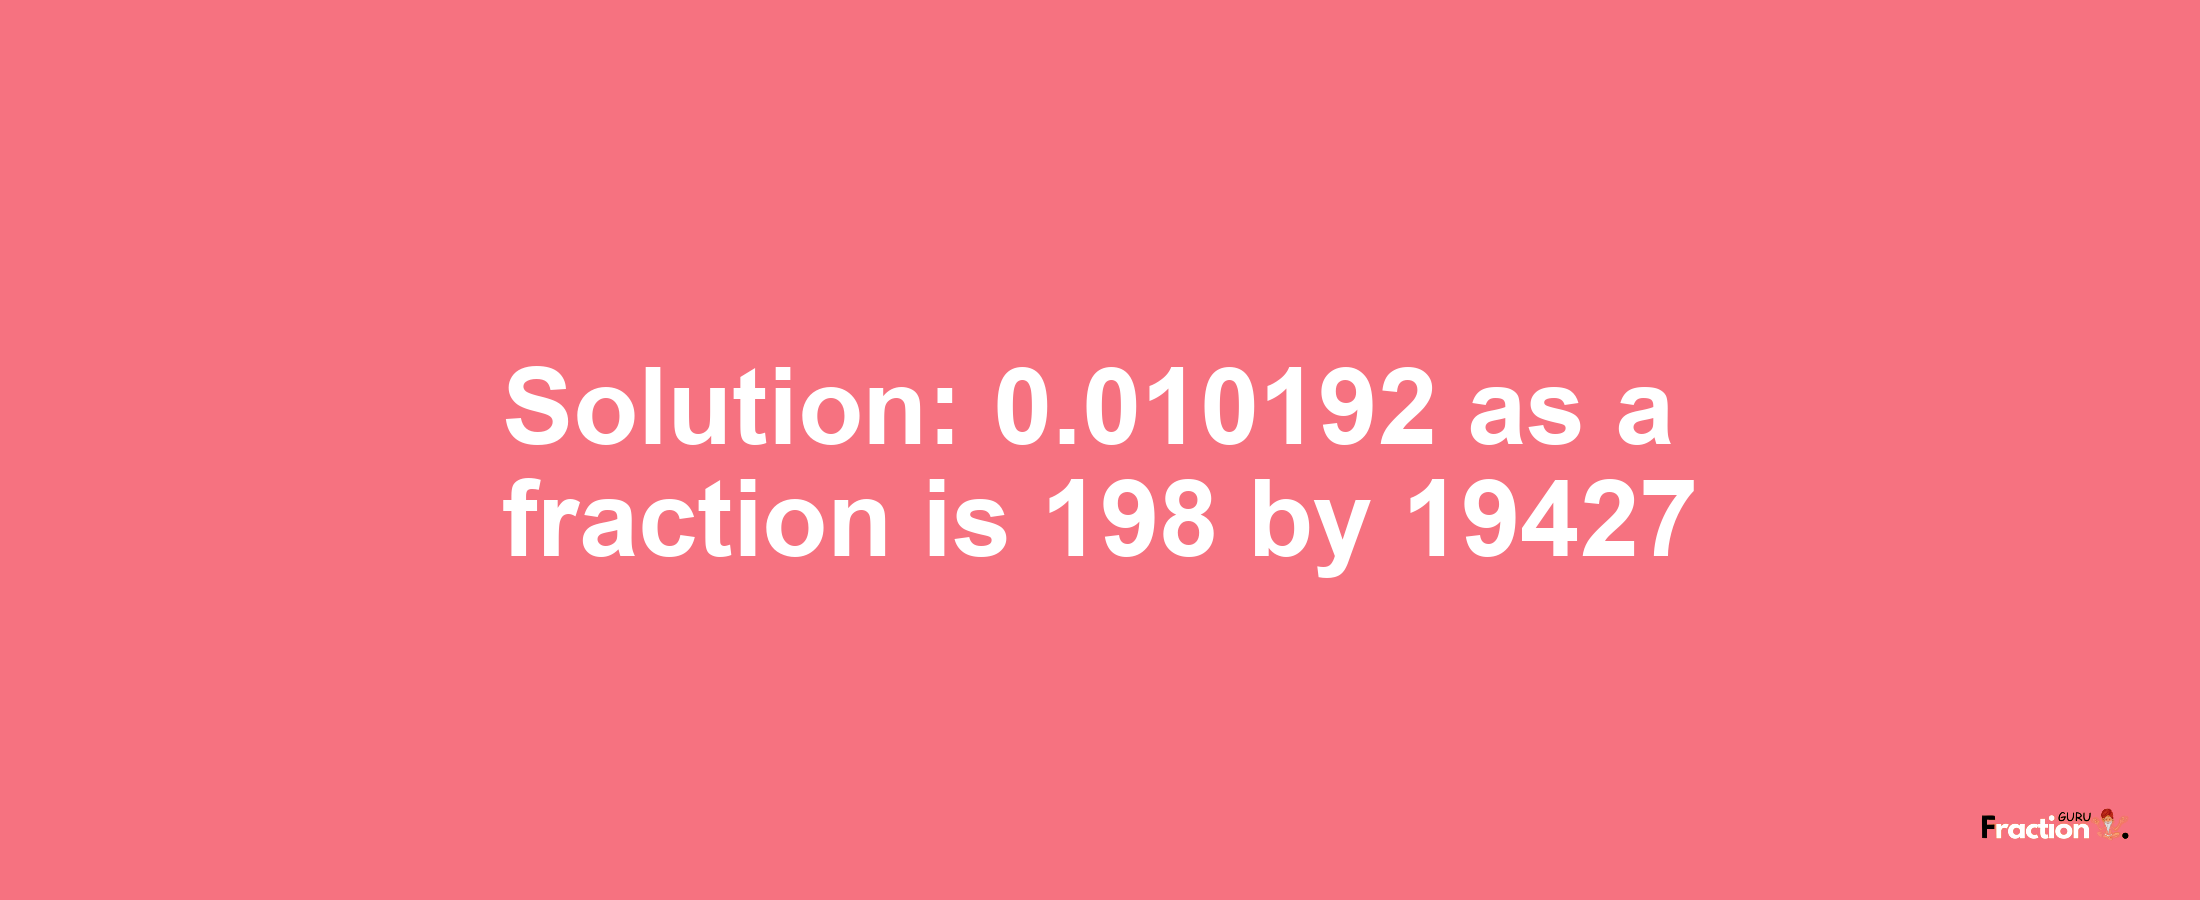 Solution:0.010192 as a fraction is 198/19427